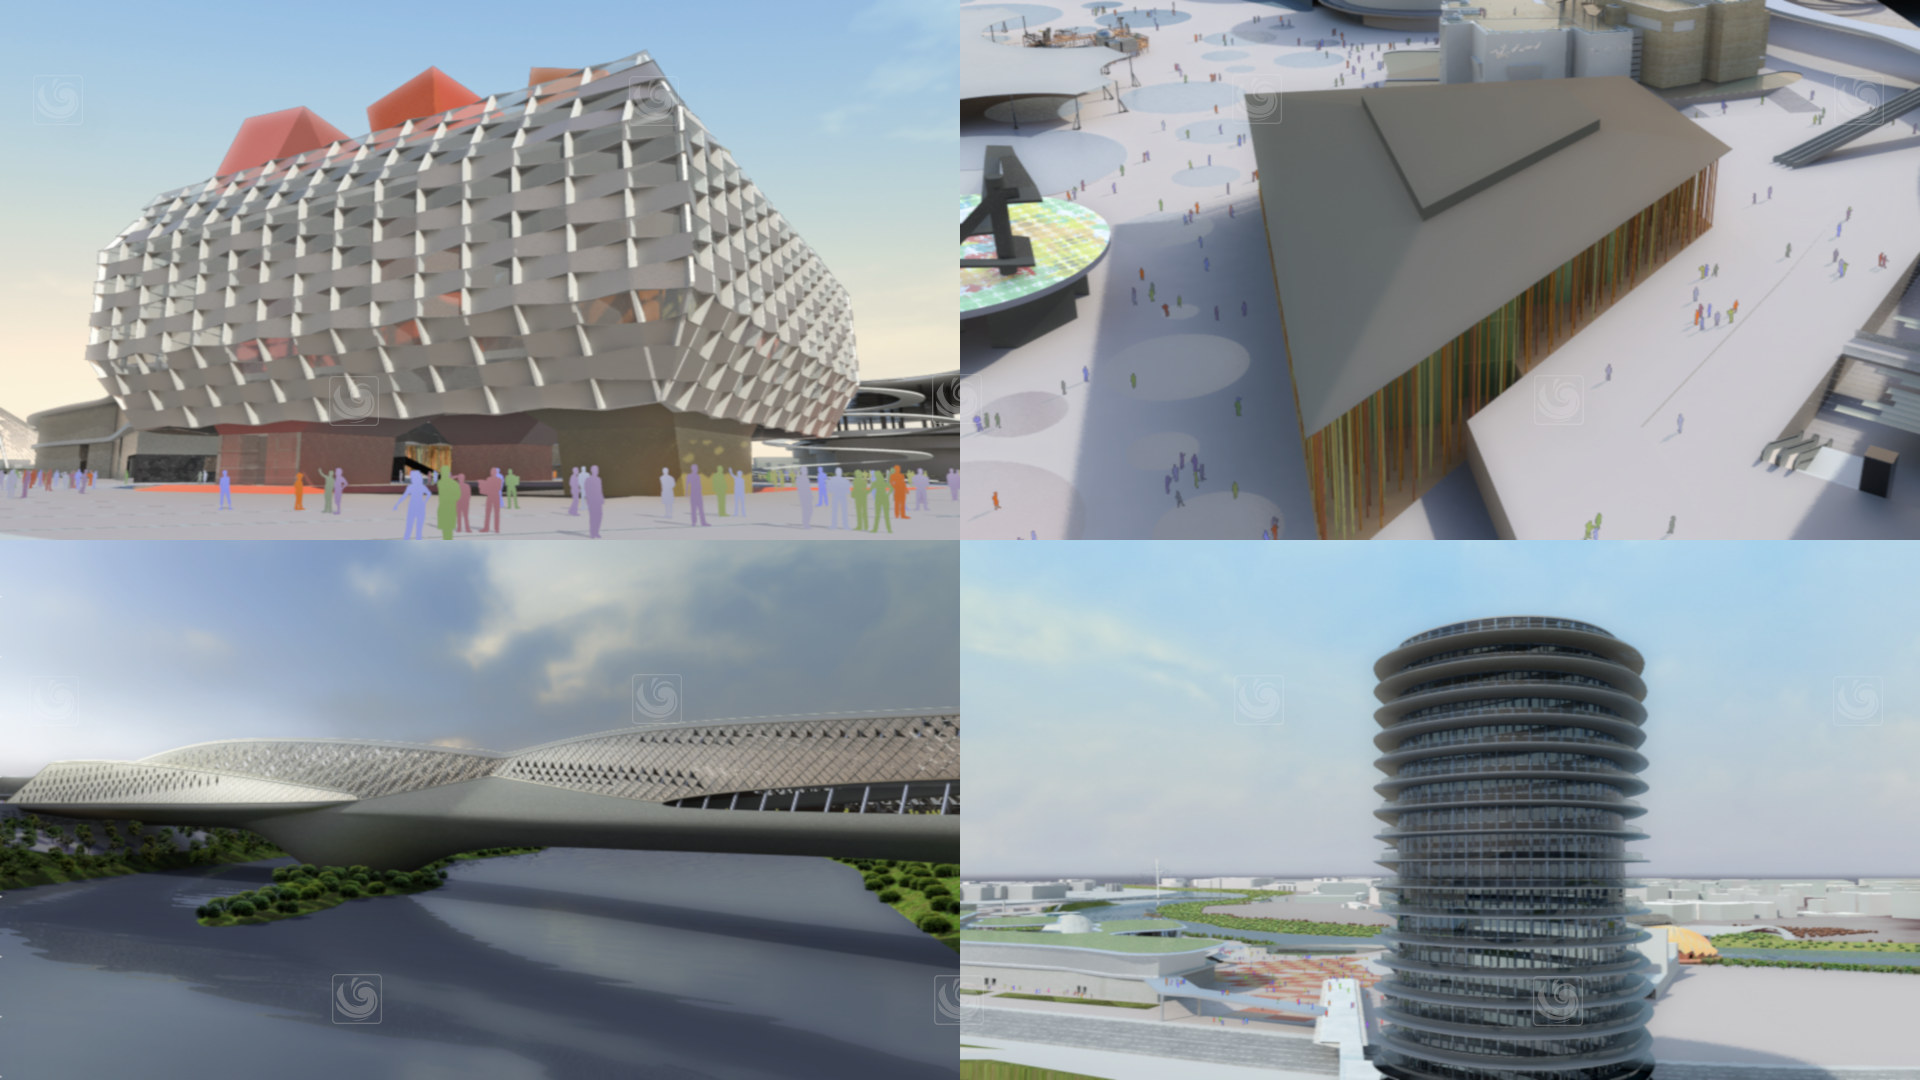 3D animation frame showing different pavilions of the Expo 2008, held in Saragossa